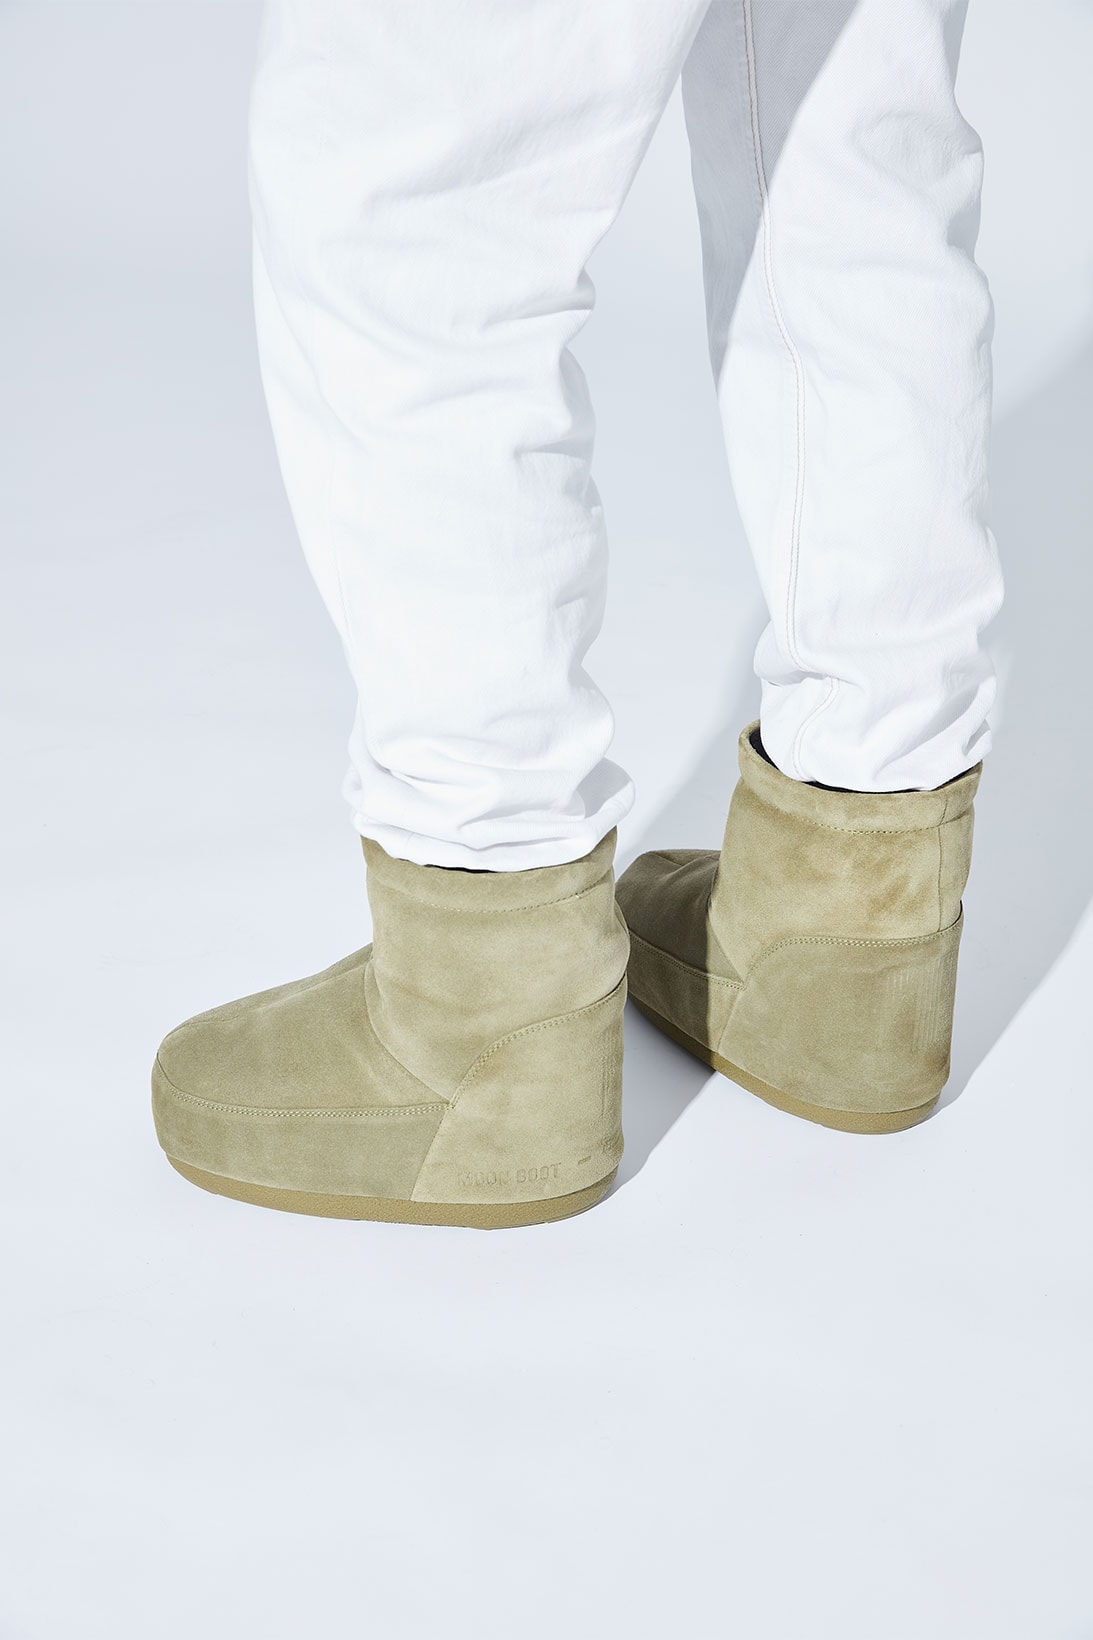 Moon Boot Debuts New Unisex Boots and Sandals